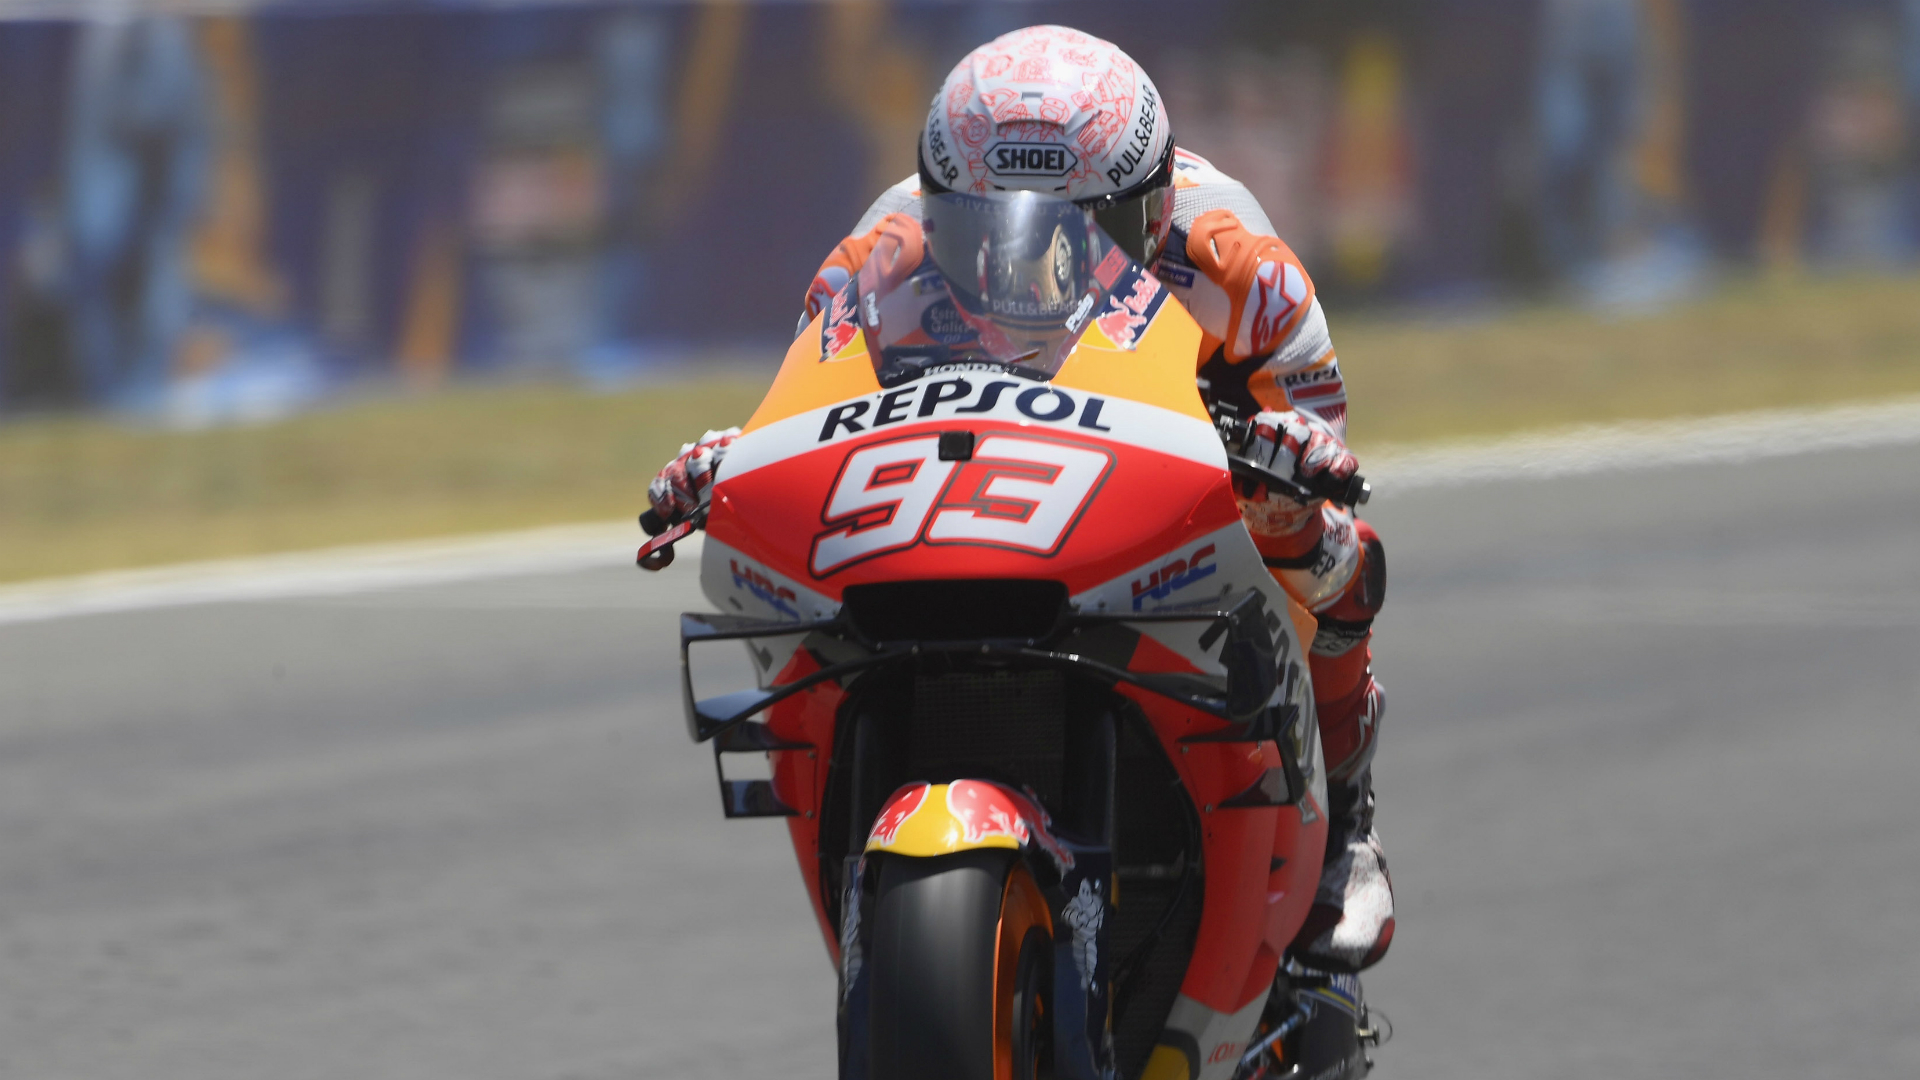 Repsol Honda confirmed a second surgery for Marc Marquez, who may miss a second consecutive MotoGP race as a result